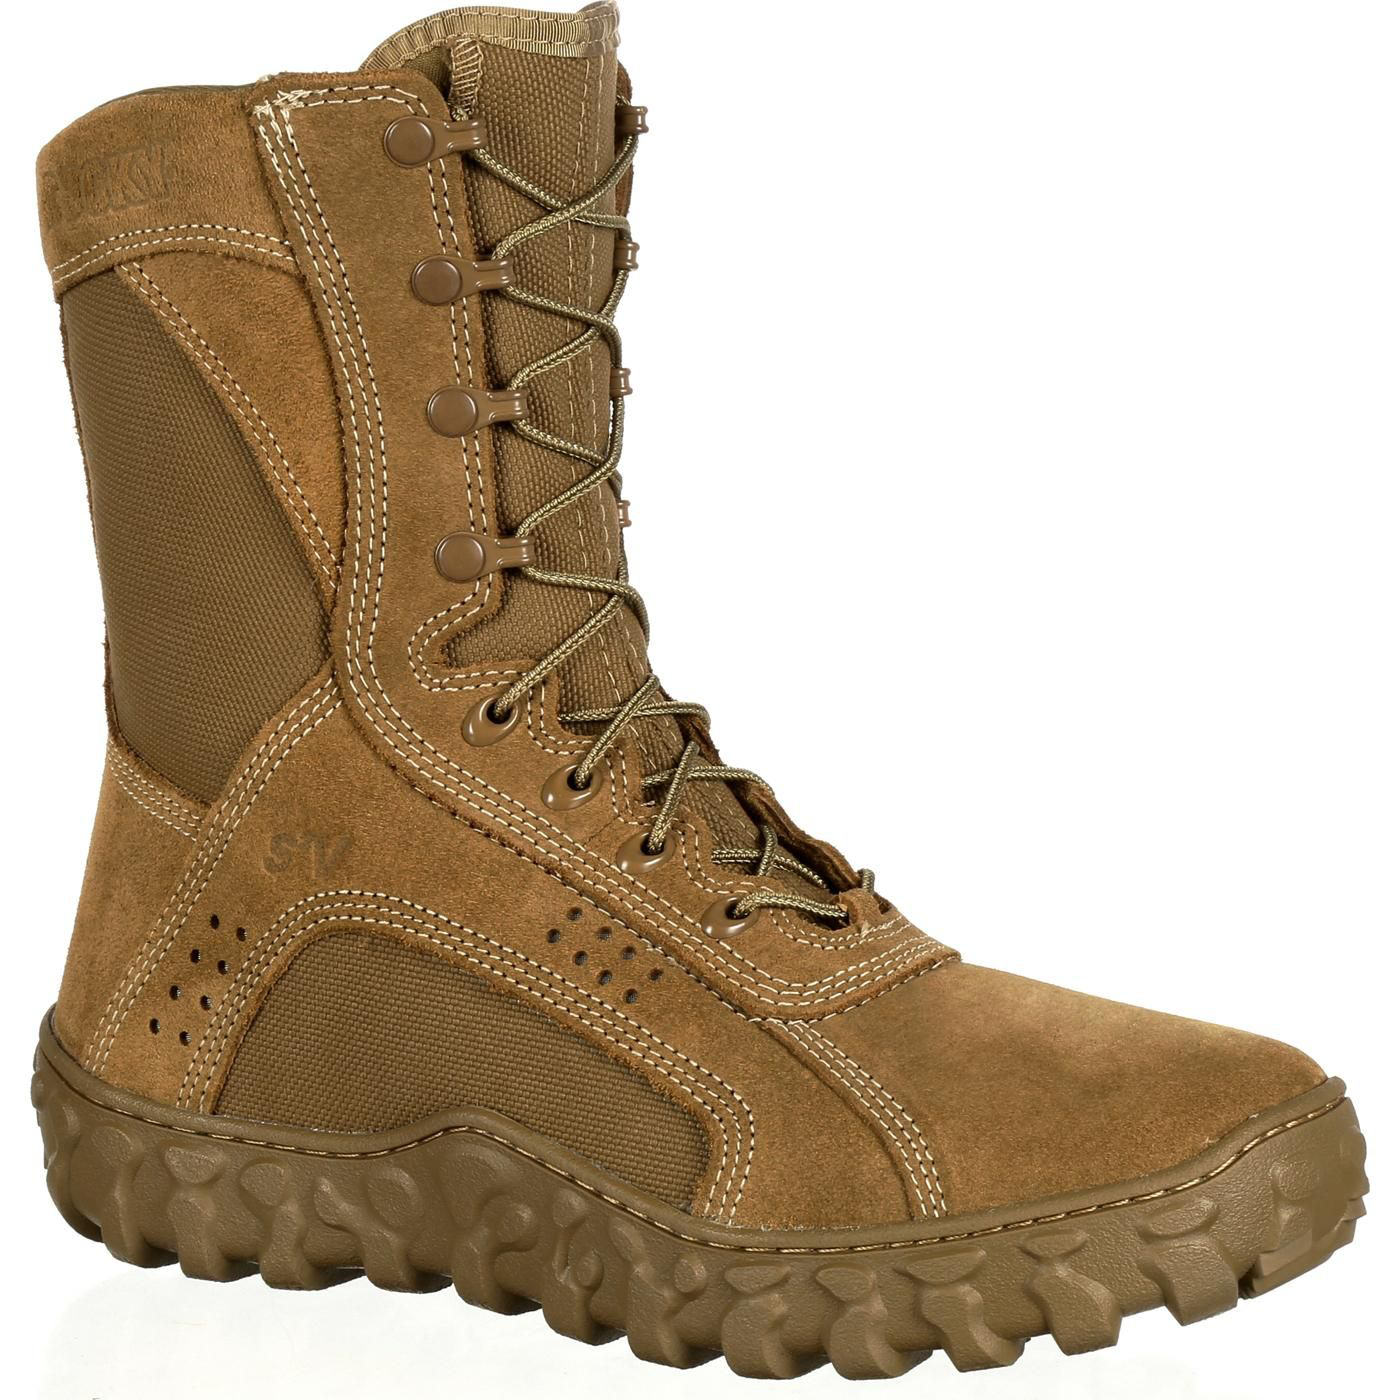 Rocky S2V Tactical Military Boots for Men - Coyote Brown - 10M